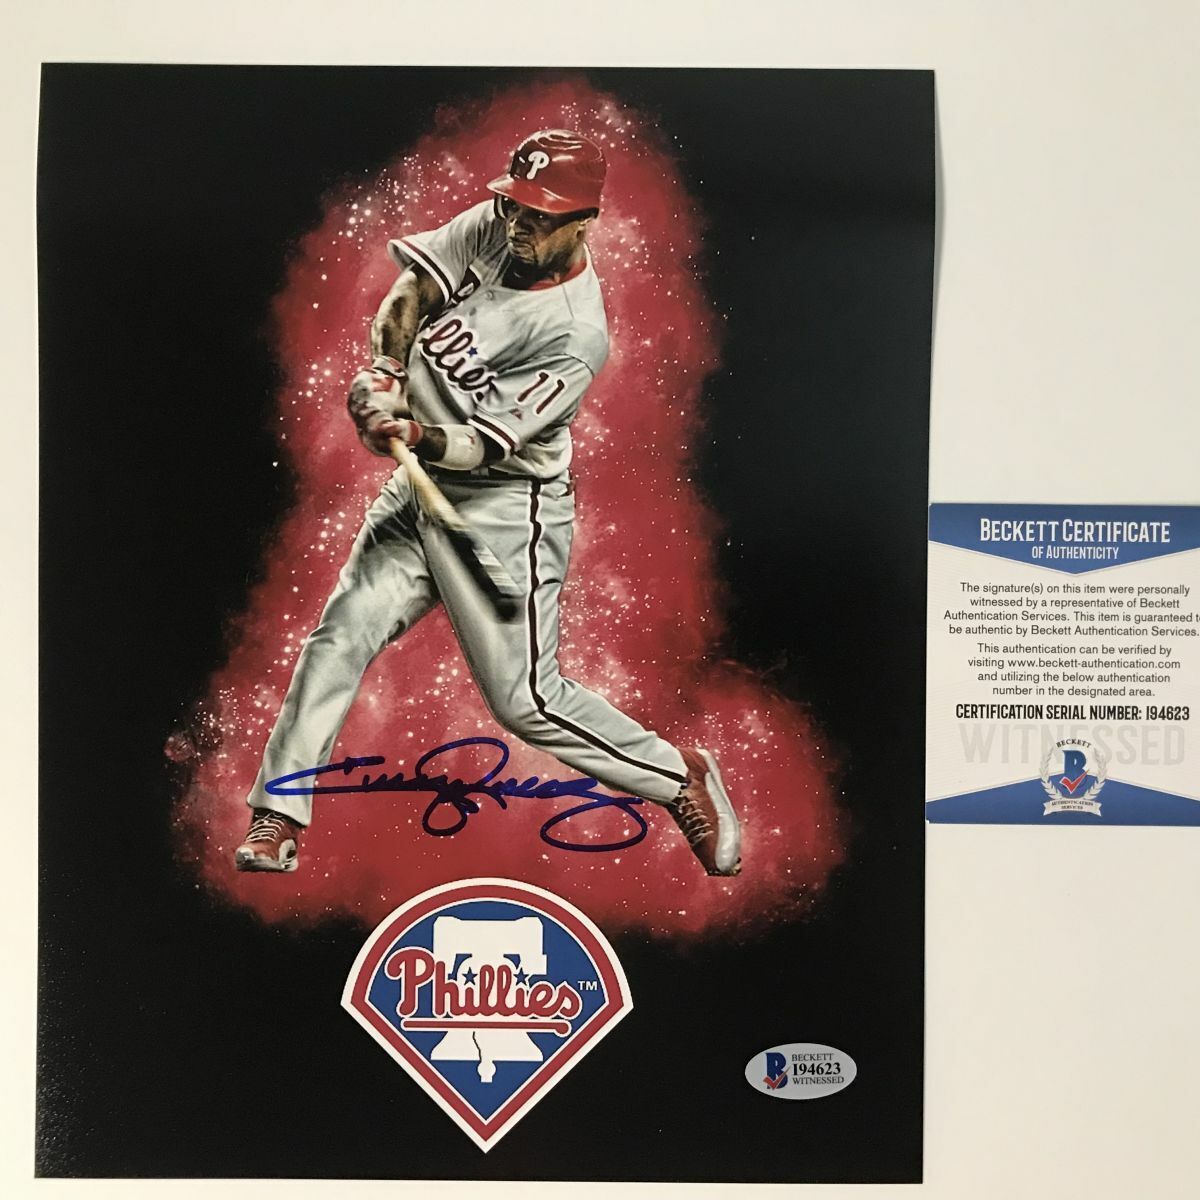 Autographed/Signed JIMMY ROLLINS Philadelphia Phillies 8x10 Photo Poster painting Beckett COA #2